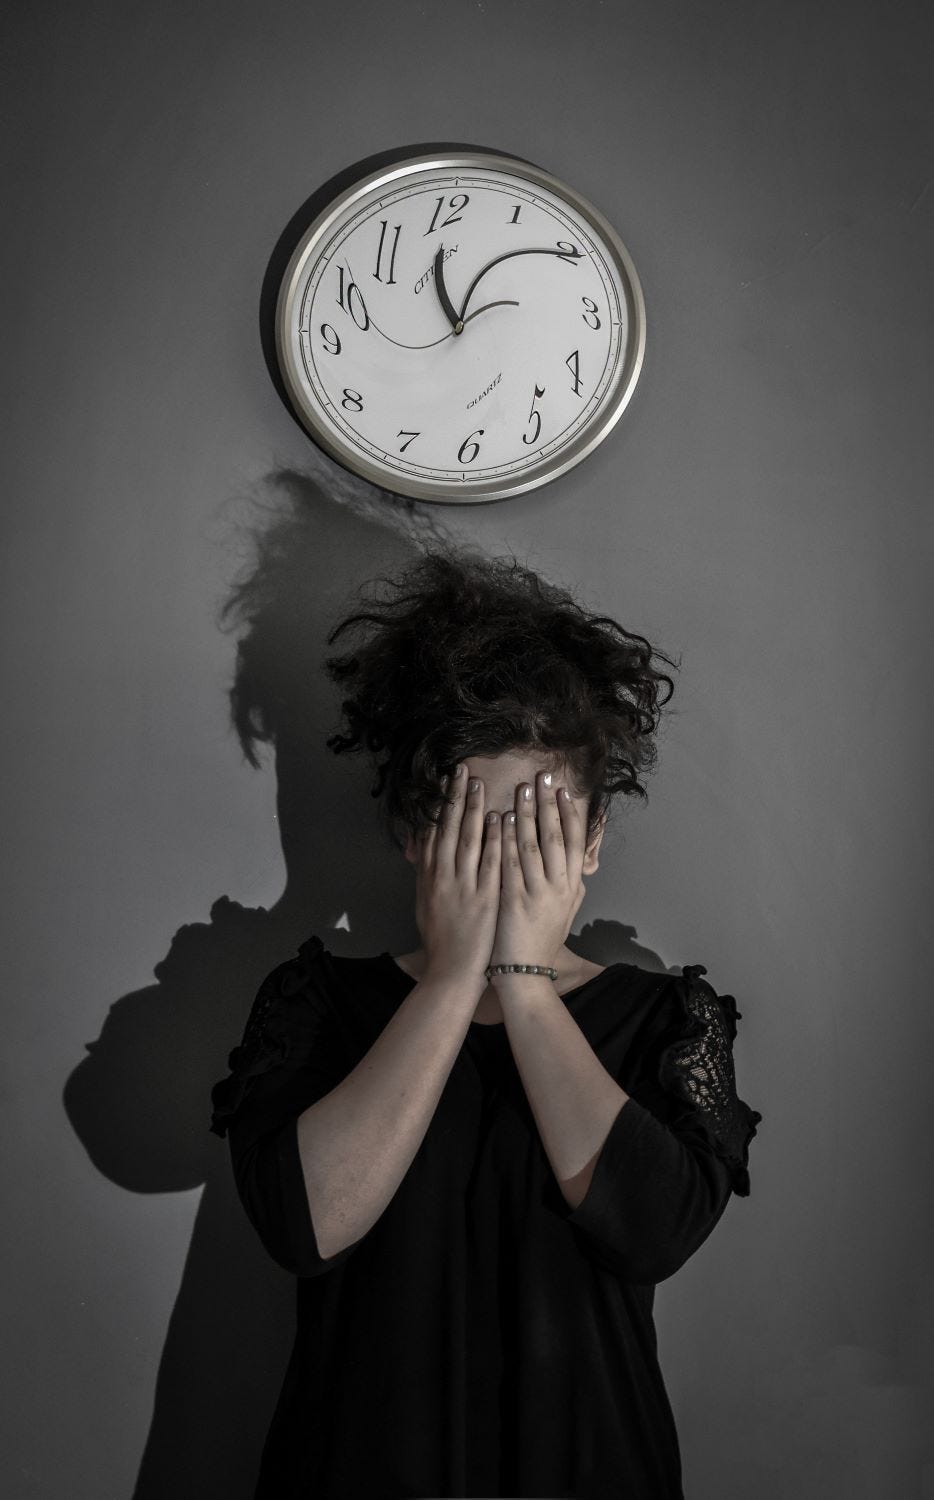 A person standing beneath a clock with their hands covering their face in anguish. The clock’s numbers and hands are distorted